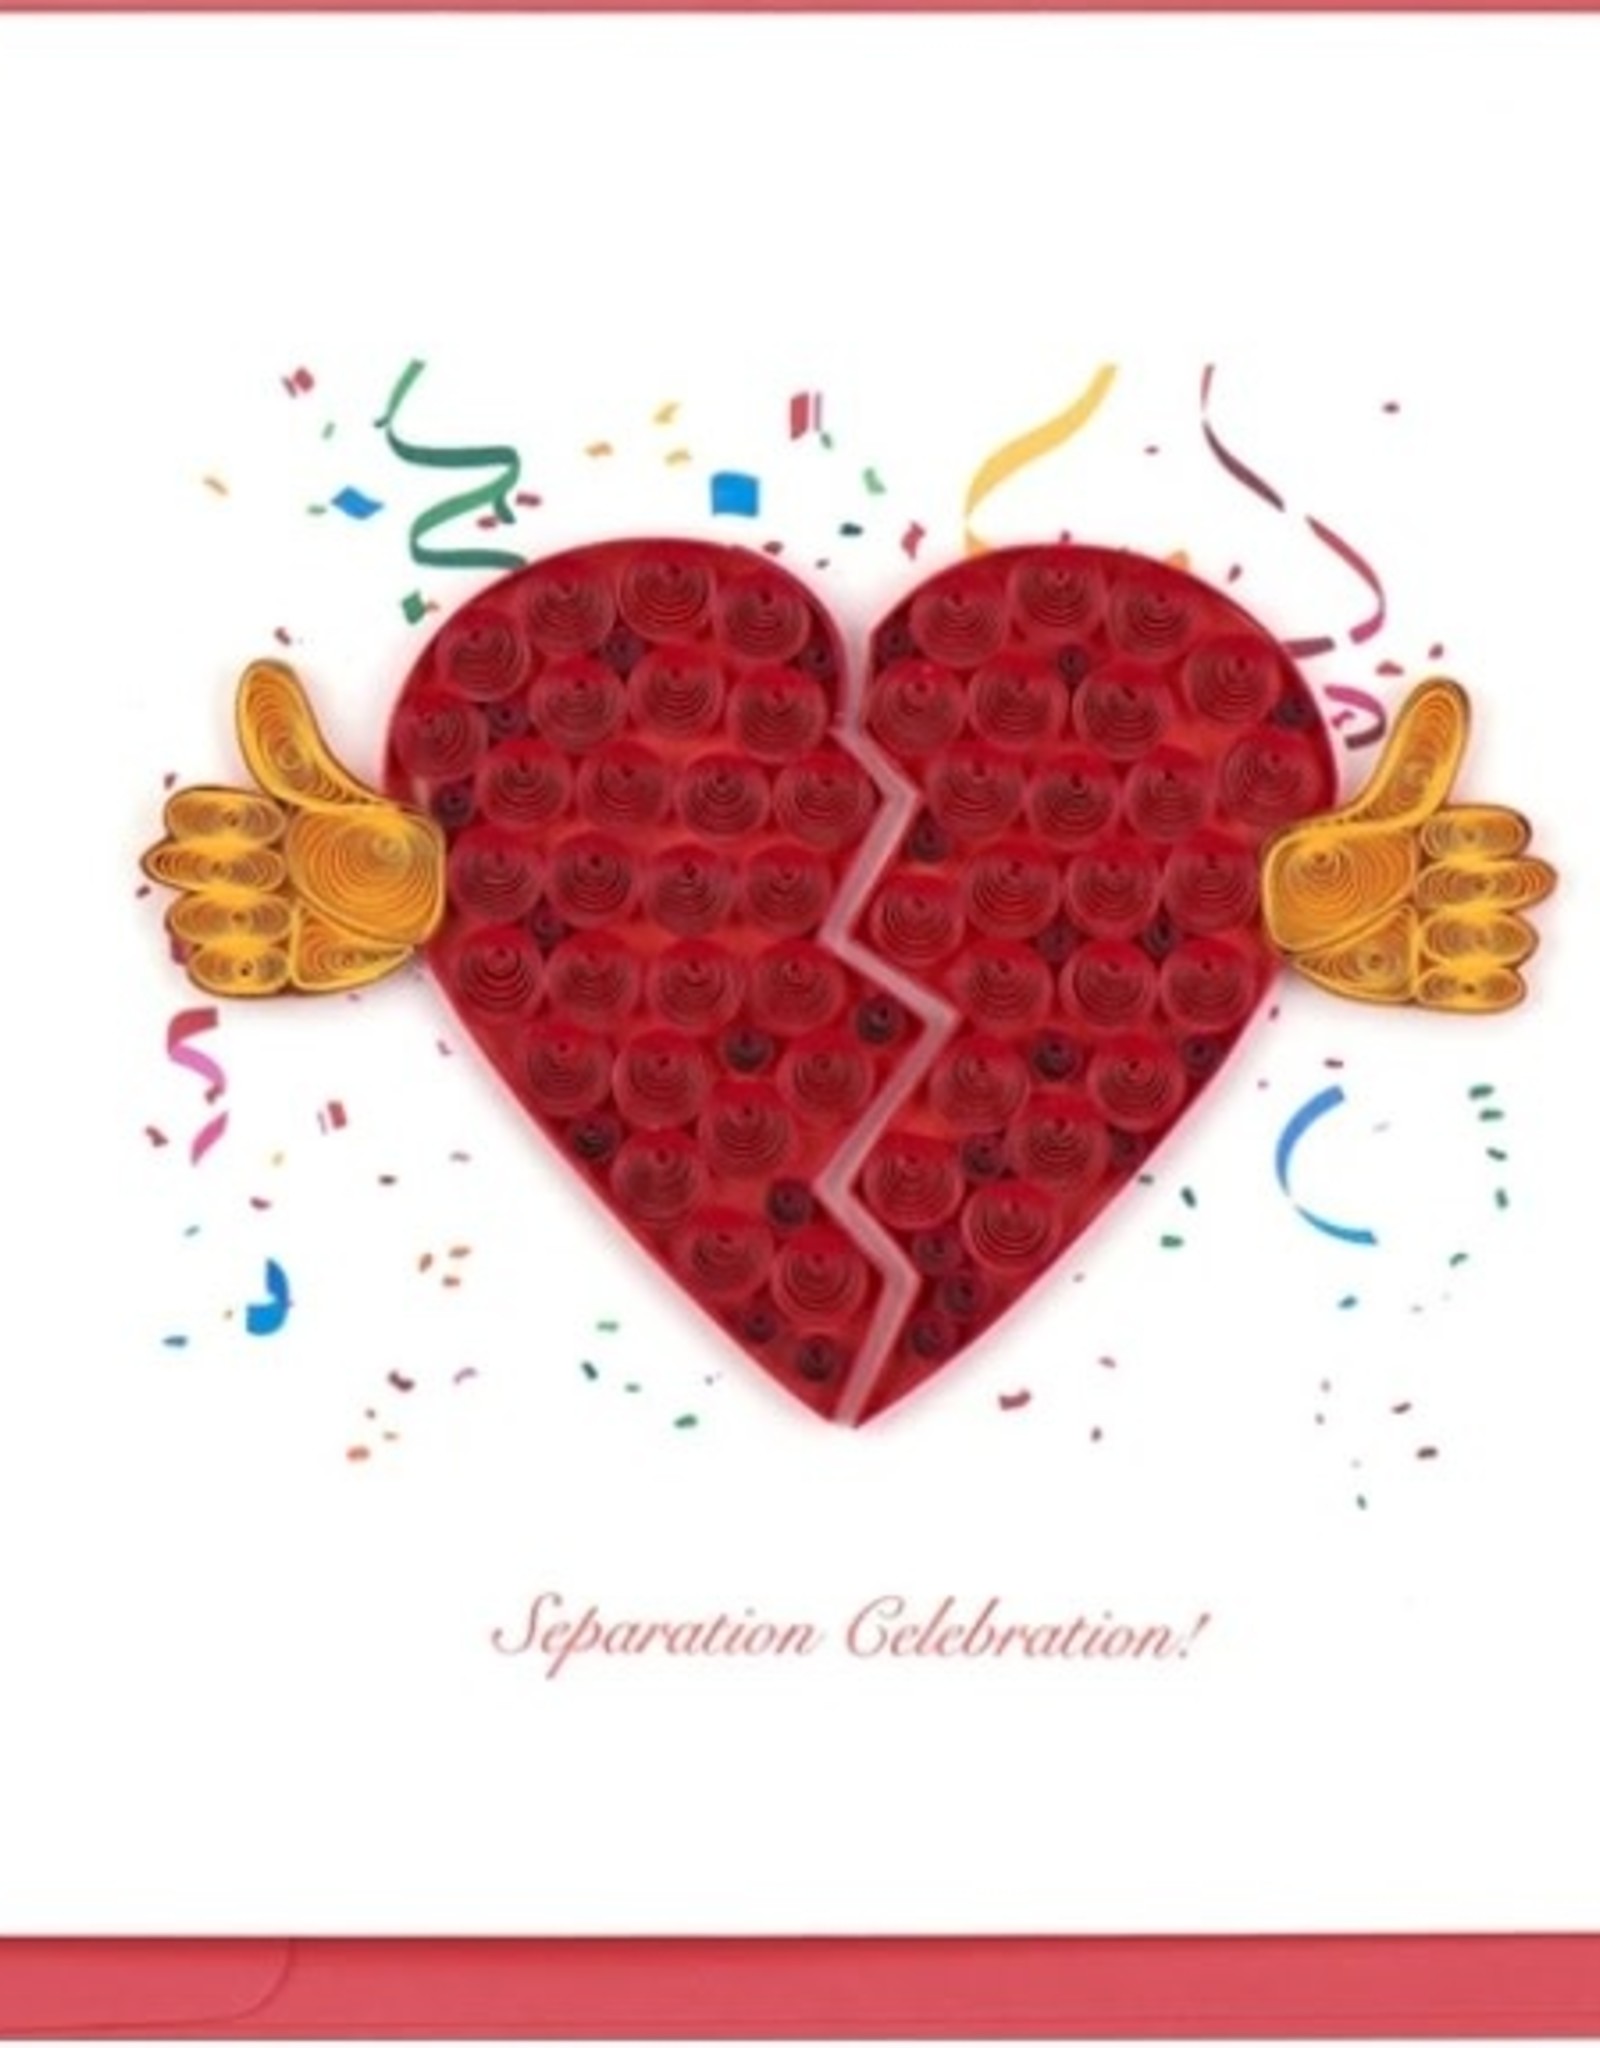 Quilling Card Quilled Separation Celebration Greeting Card